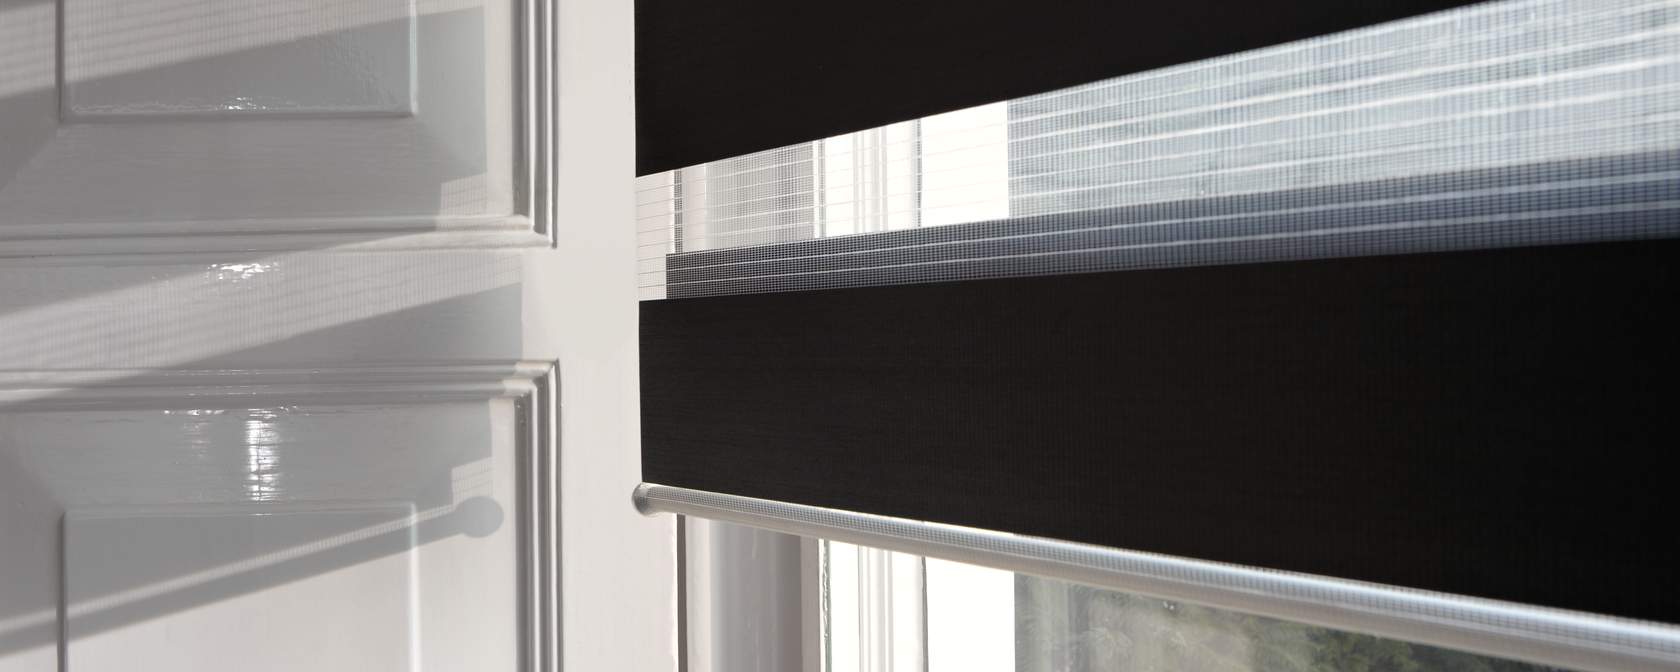 Mortal moreel lotus Twist® Day & Night Blinds | Made to Measure - luxaflex.co.uk